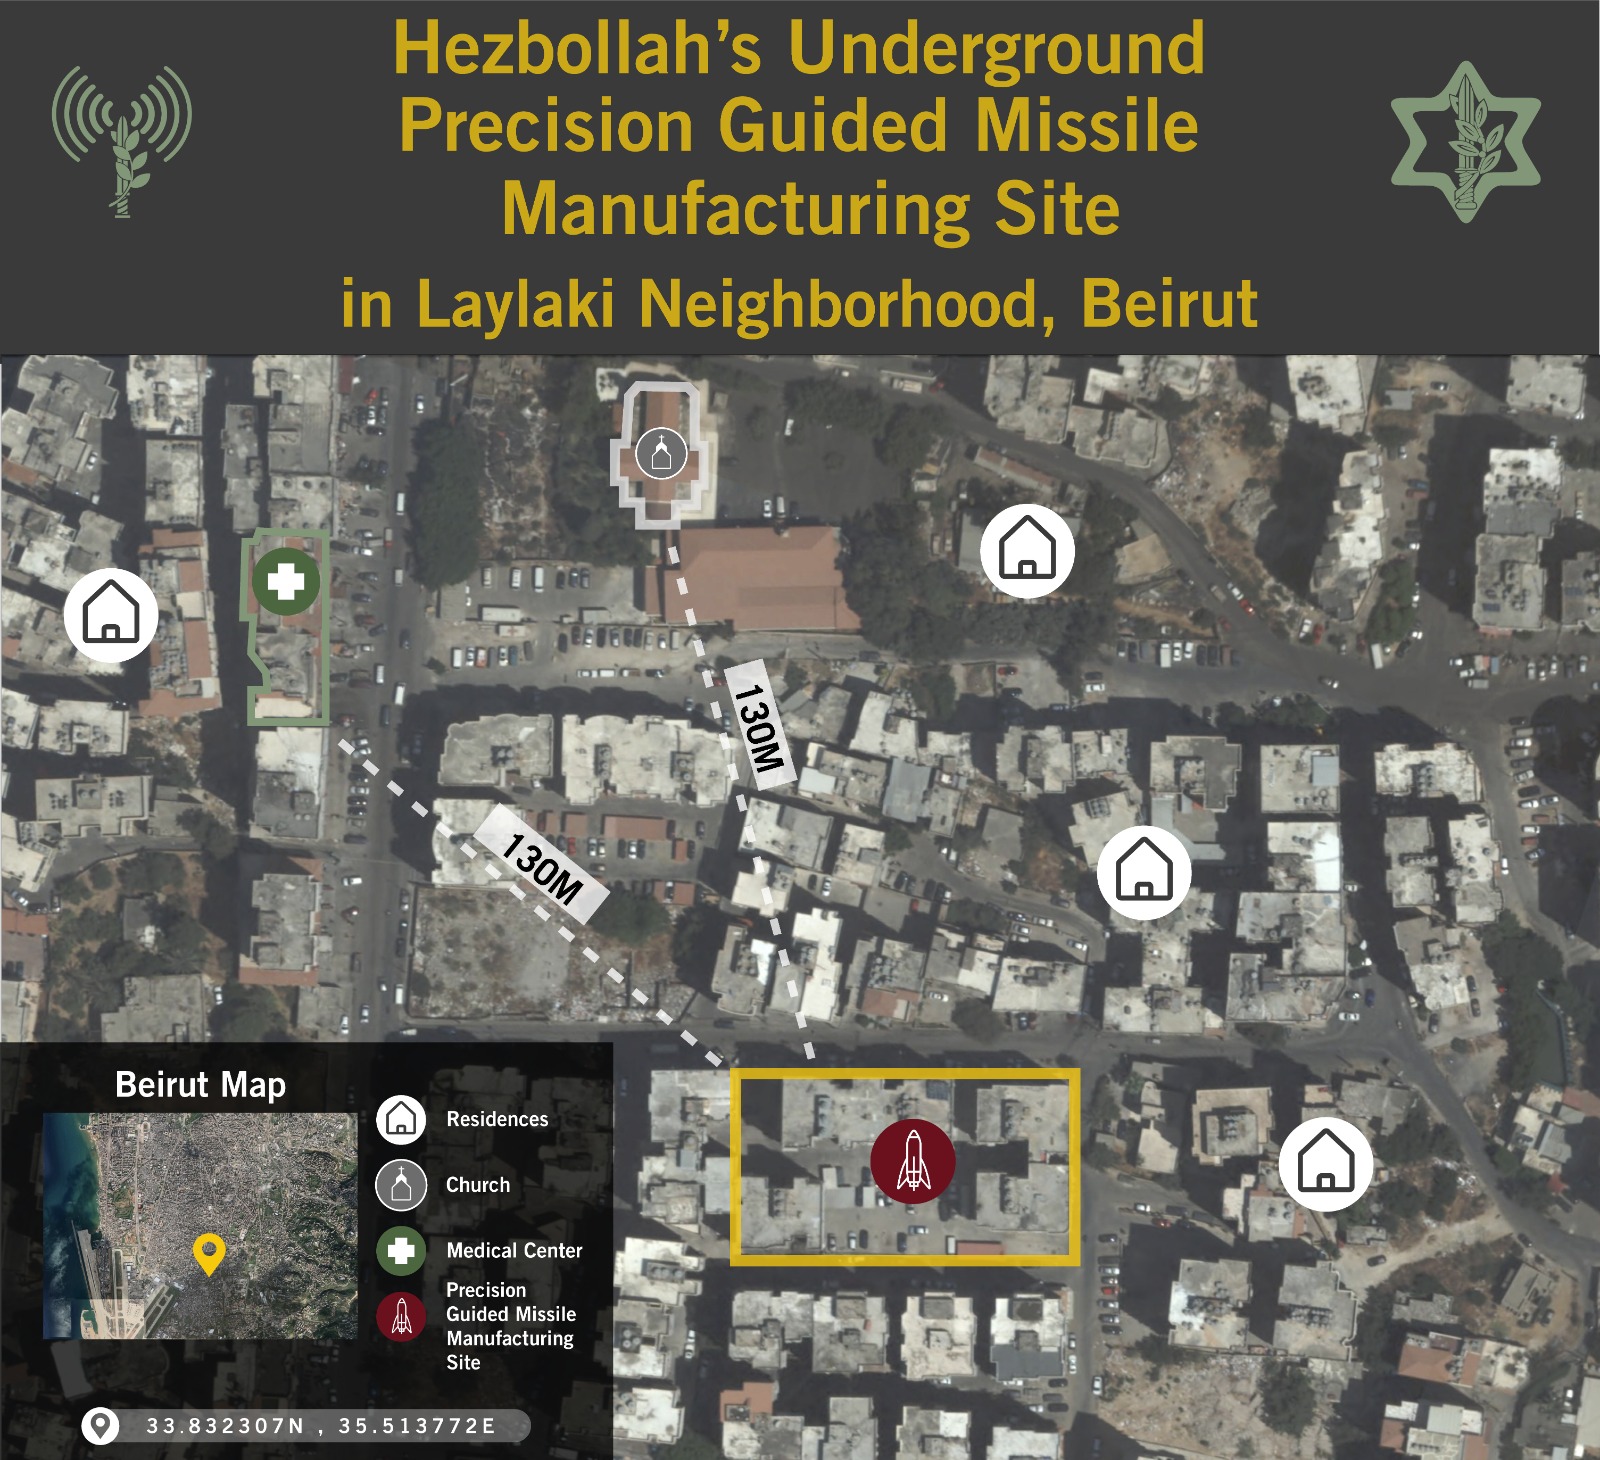 Israel Releases Report About Hezbollah's Alleged Missile Factory In Beirut Residential Area